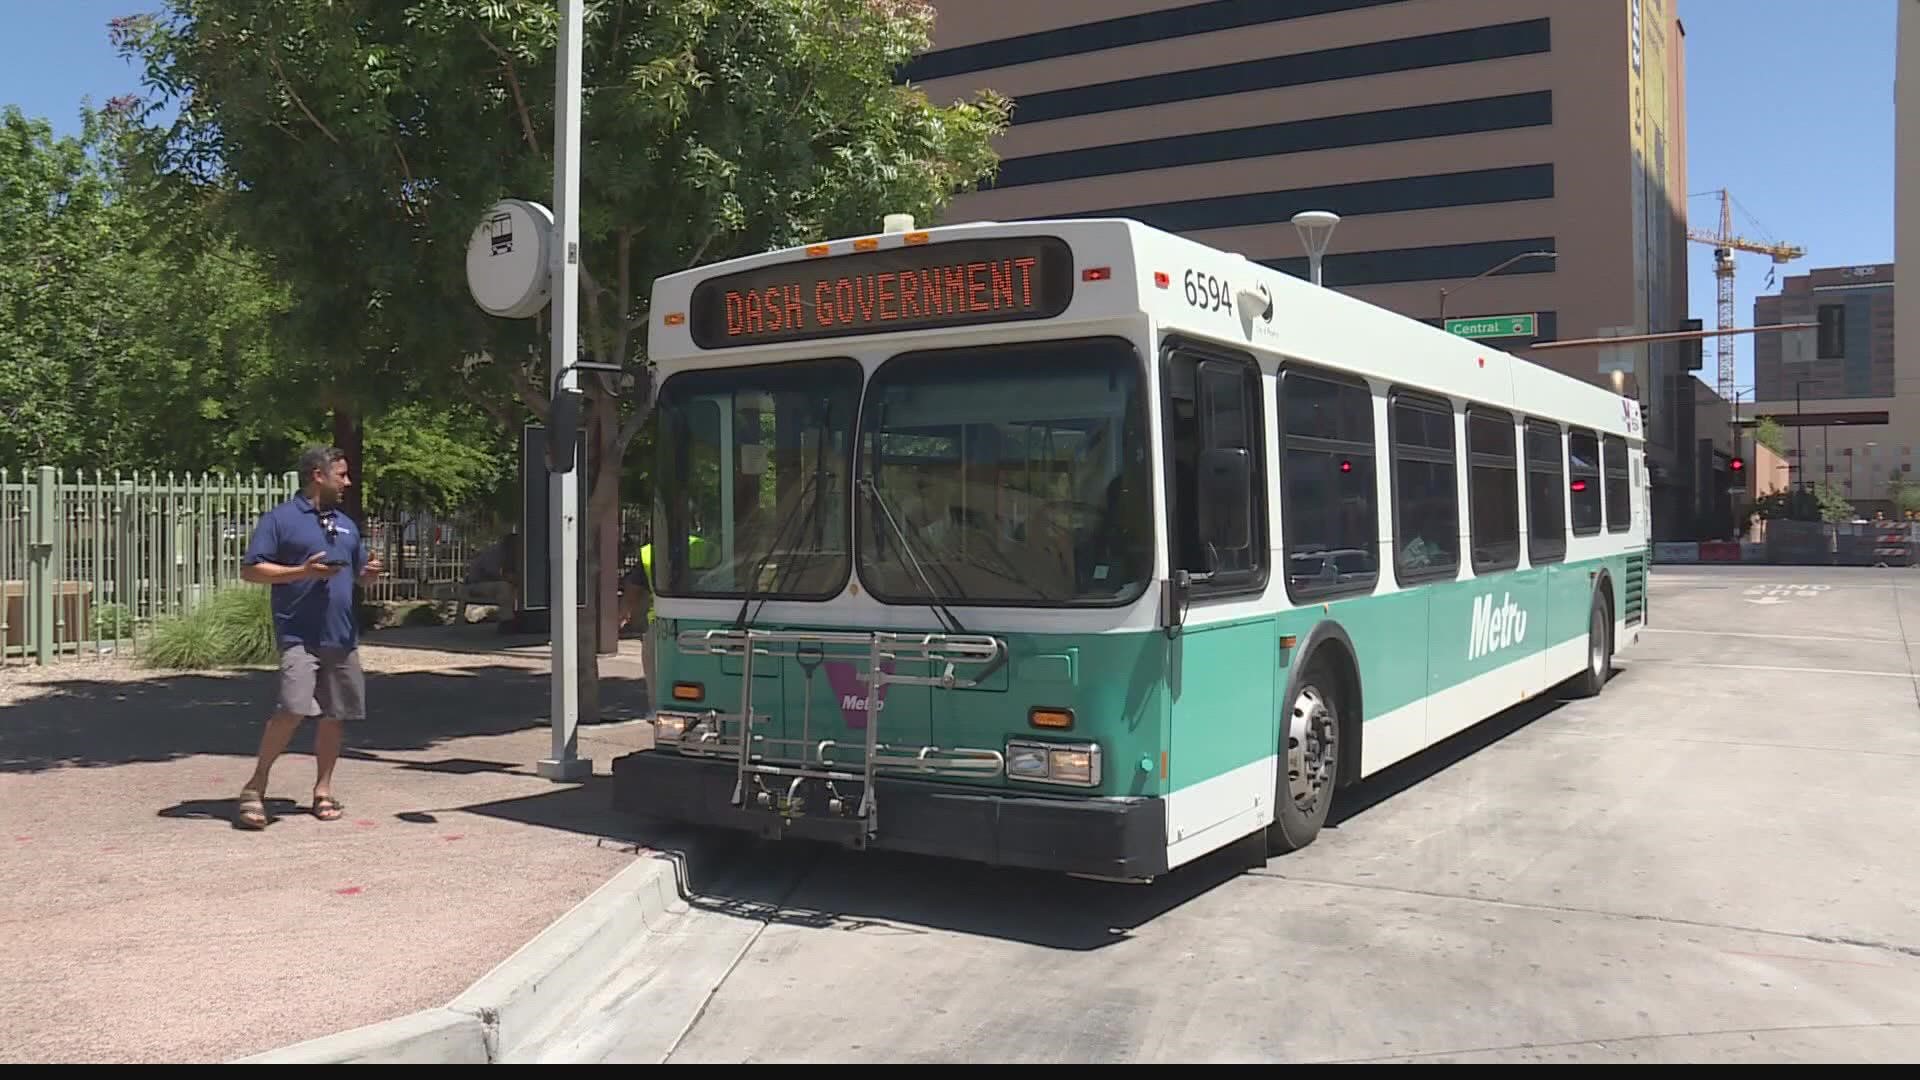 Data from the City of Phoenix shows crime in and around public transportation hit a five-year high in 2021.